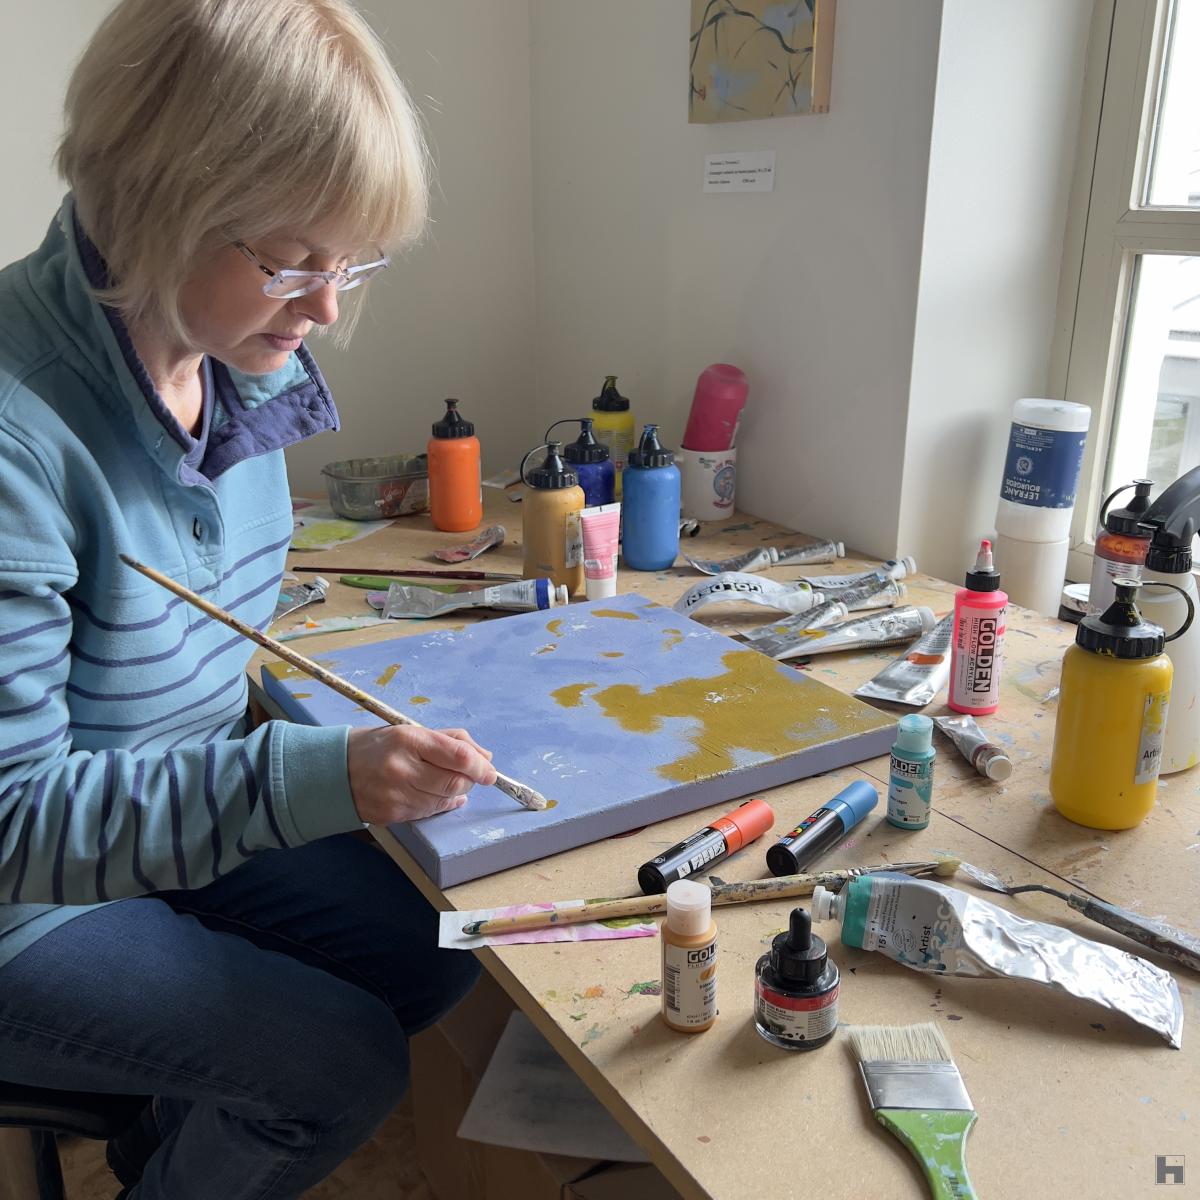 The artist sitting at her desk, working on the small, blue painting